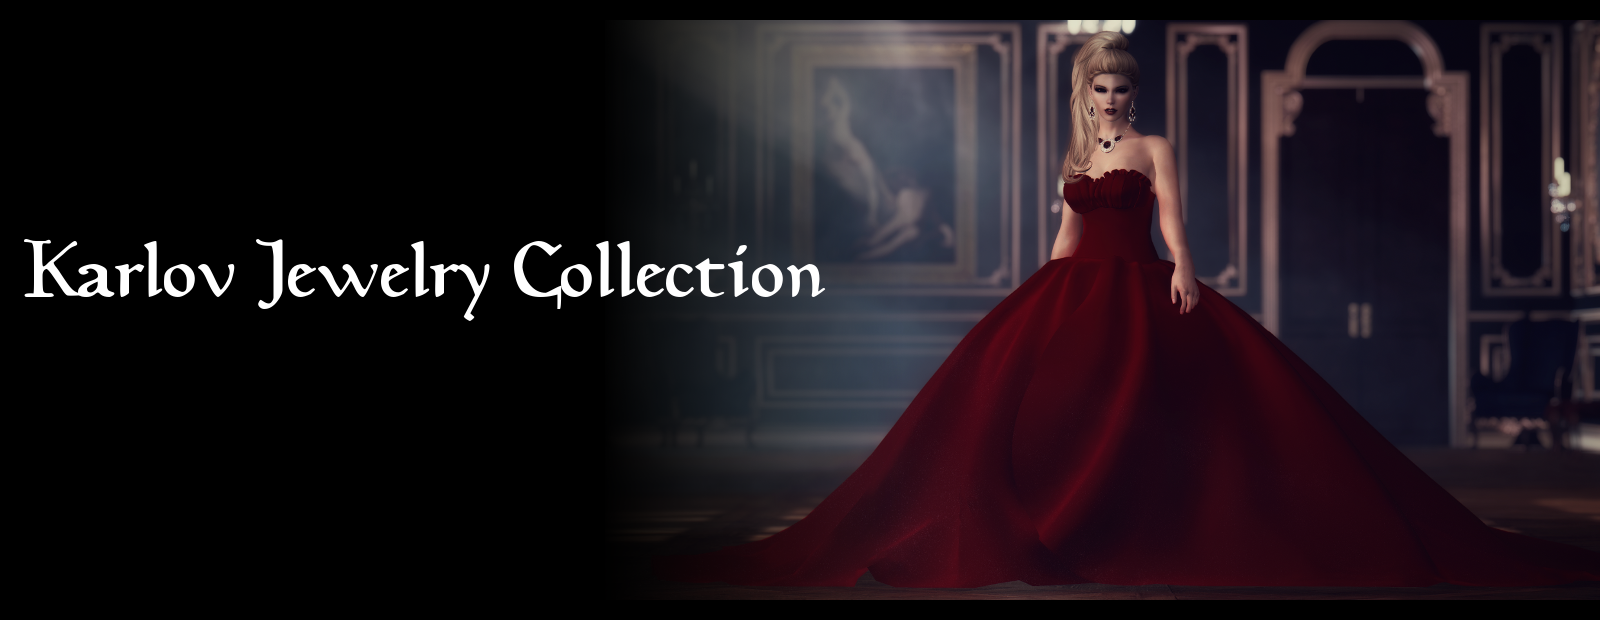 KarlovJewelryCollection.png.30d1a0317c039d8b7efe04ed6df2fcf0.png